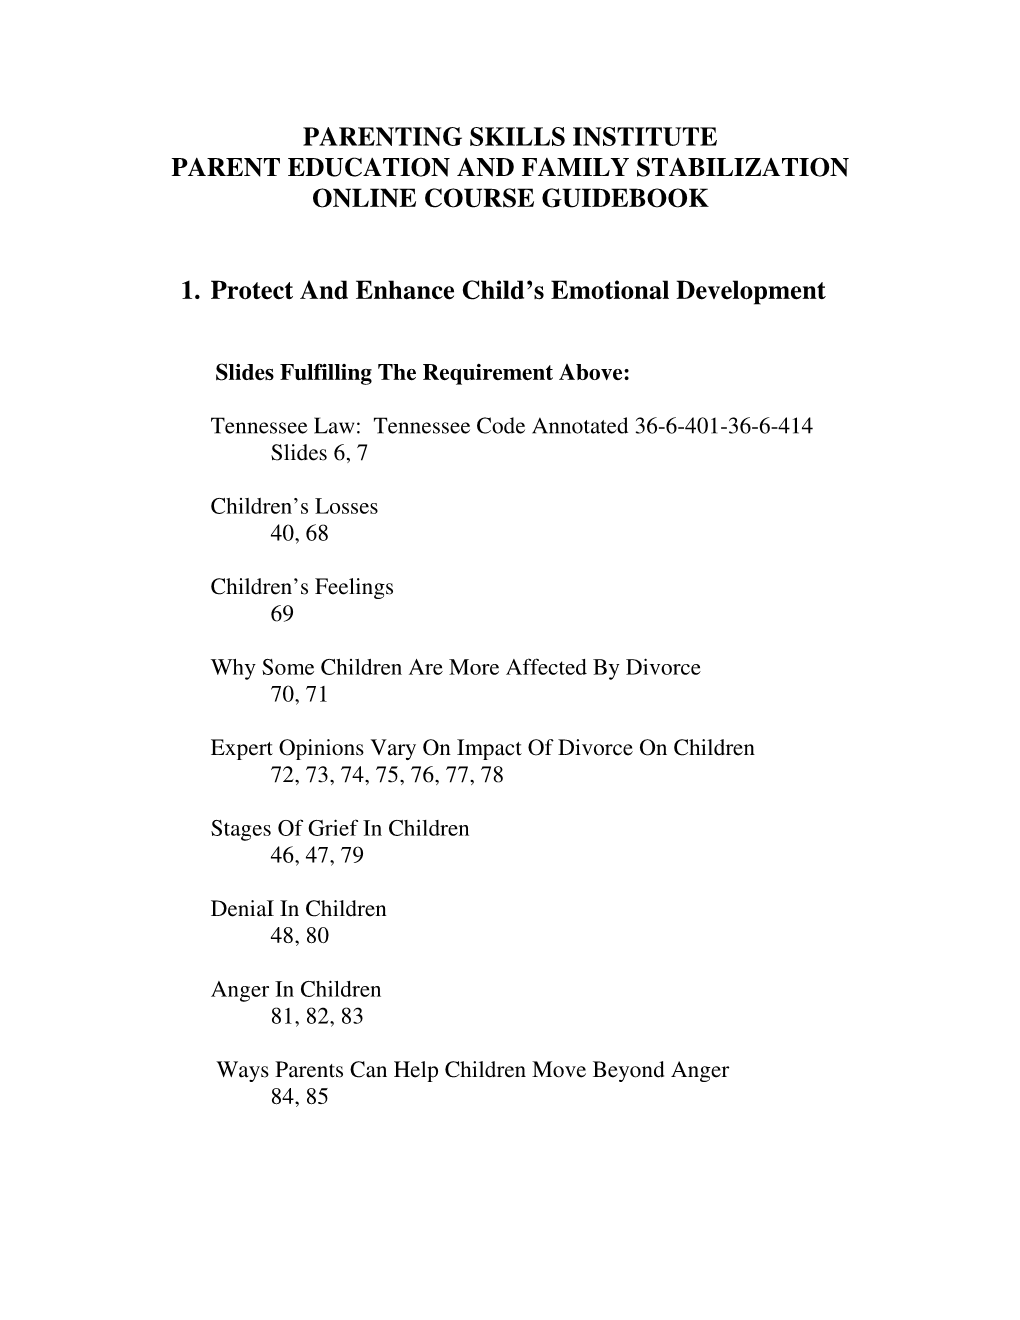 Parenting Skills Institute Parent Education and Family Stabilization Online Course Guidebook